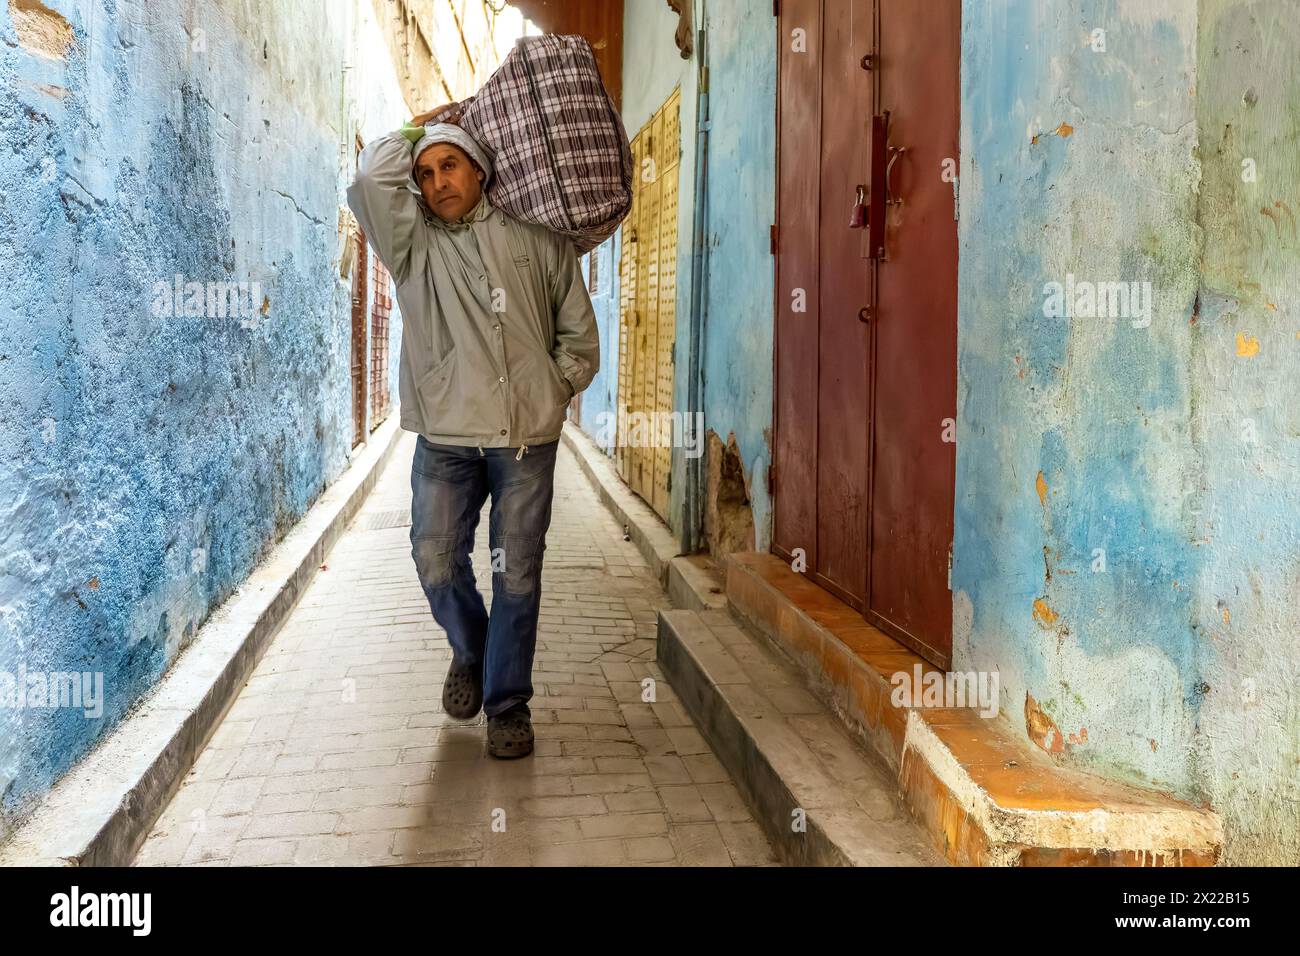 A porter man is walking down a tight alleyway in the medina of Fez, Morocco. Stock Photo